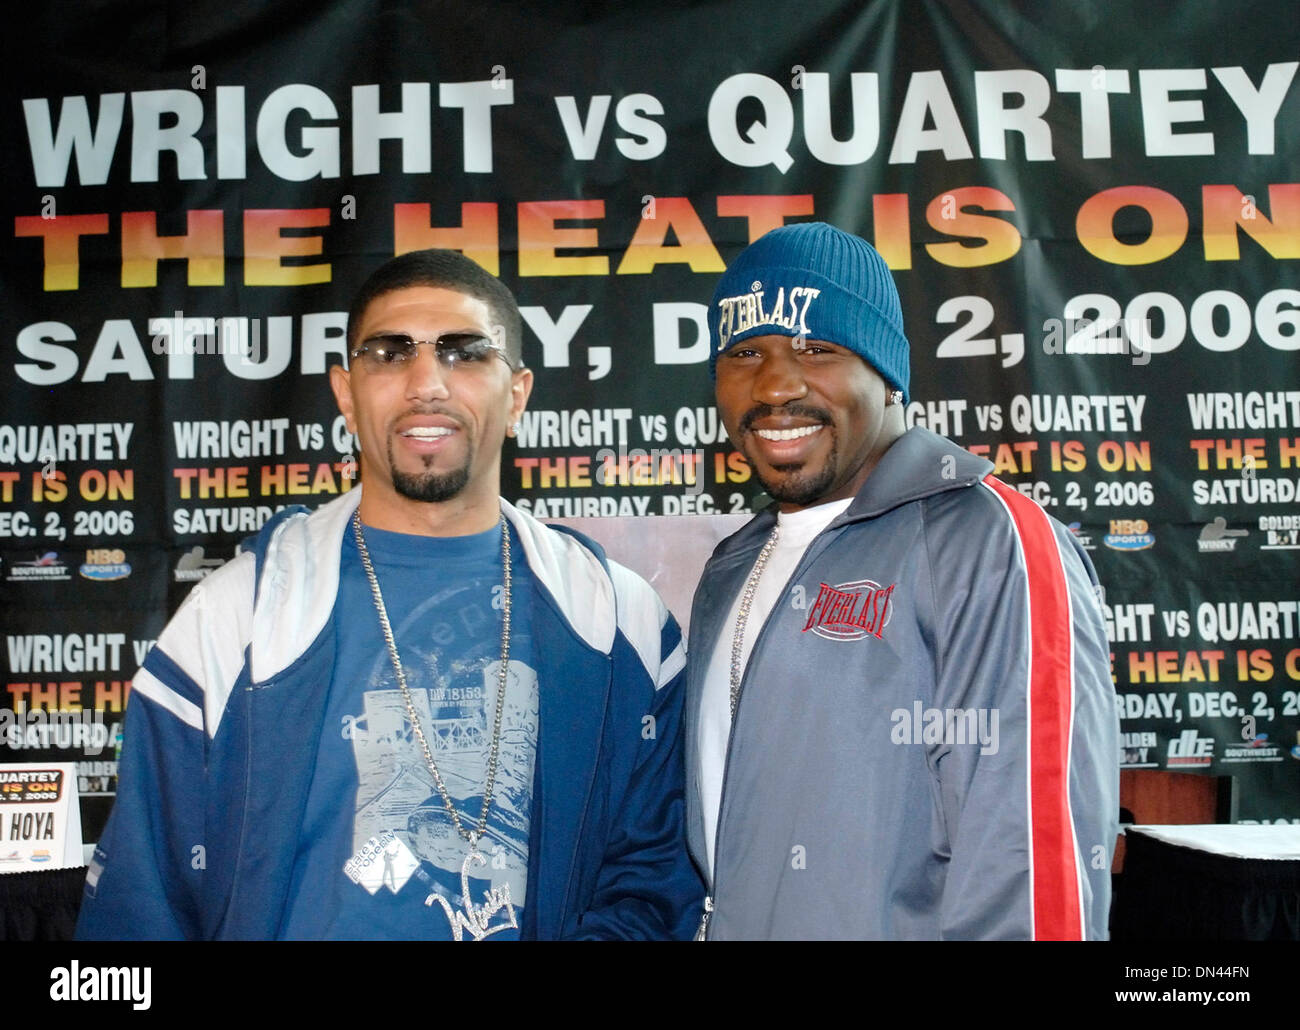 Nov 29, 2006; Tampa, FL, USA; Boxers 'RONALD WINKY' WRIGHT and JEFF LACY at the final press conference for their upcoming bouts on Saturday December 2 at The St. Pete Times Forum in Tampa. Mandatory Credit: Photo by Rob DeLorenzo/ZUMA Press. (©) Copyright 2006 by Rob DeLorenzo Stock Photo